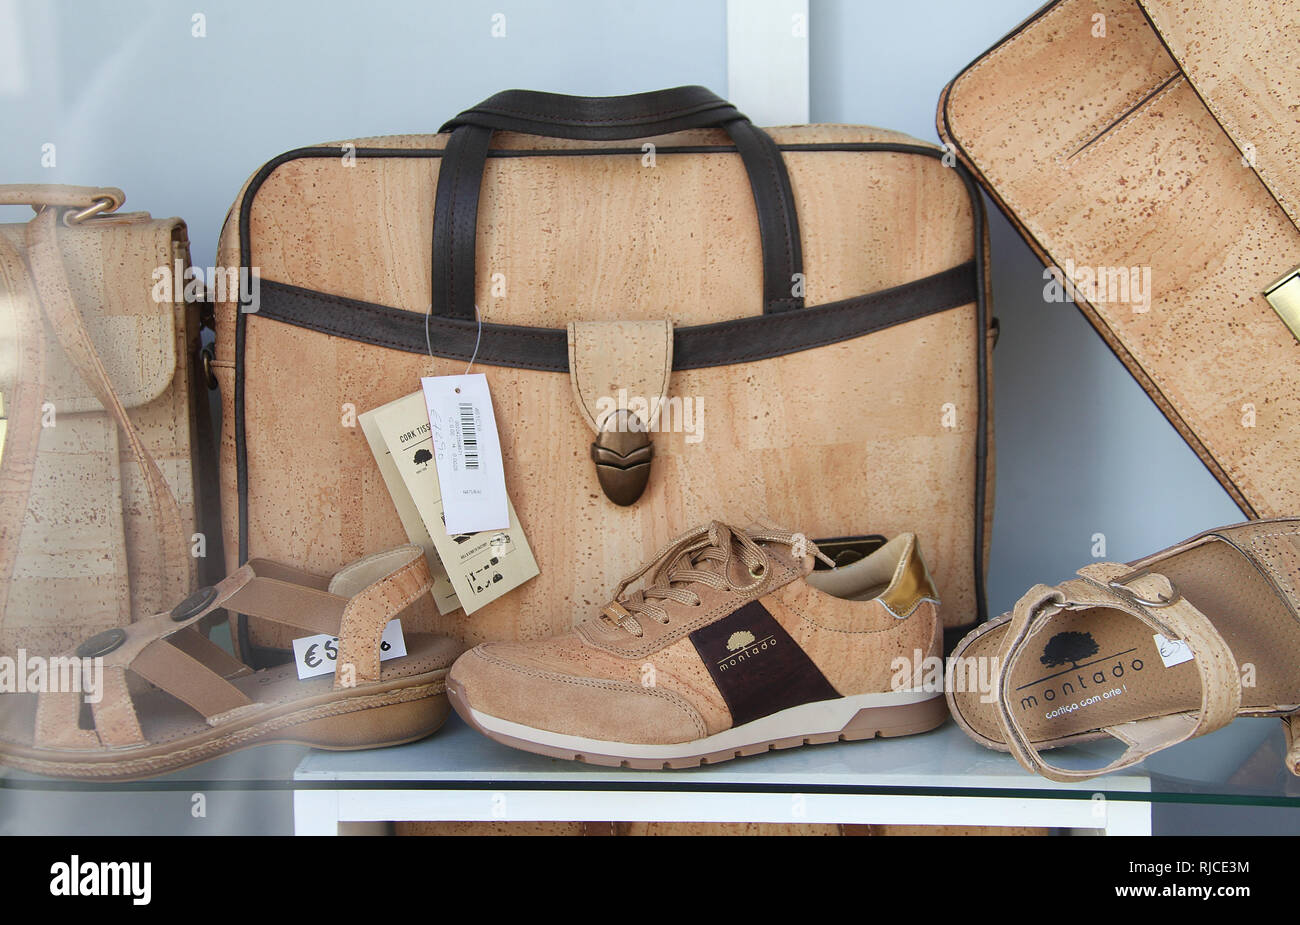 Bags and shoes made from natural cork in a Portuguese shop window Stock Photo